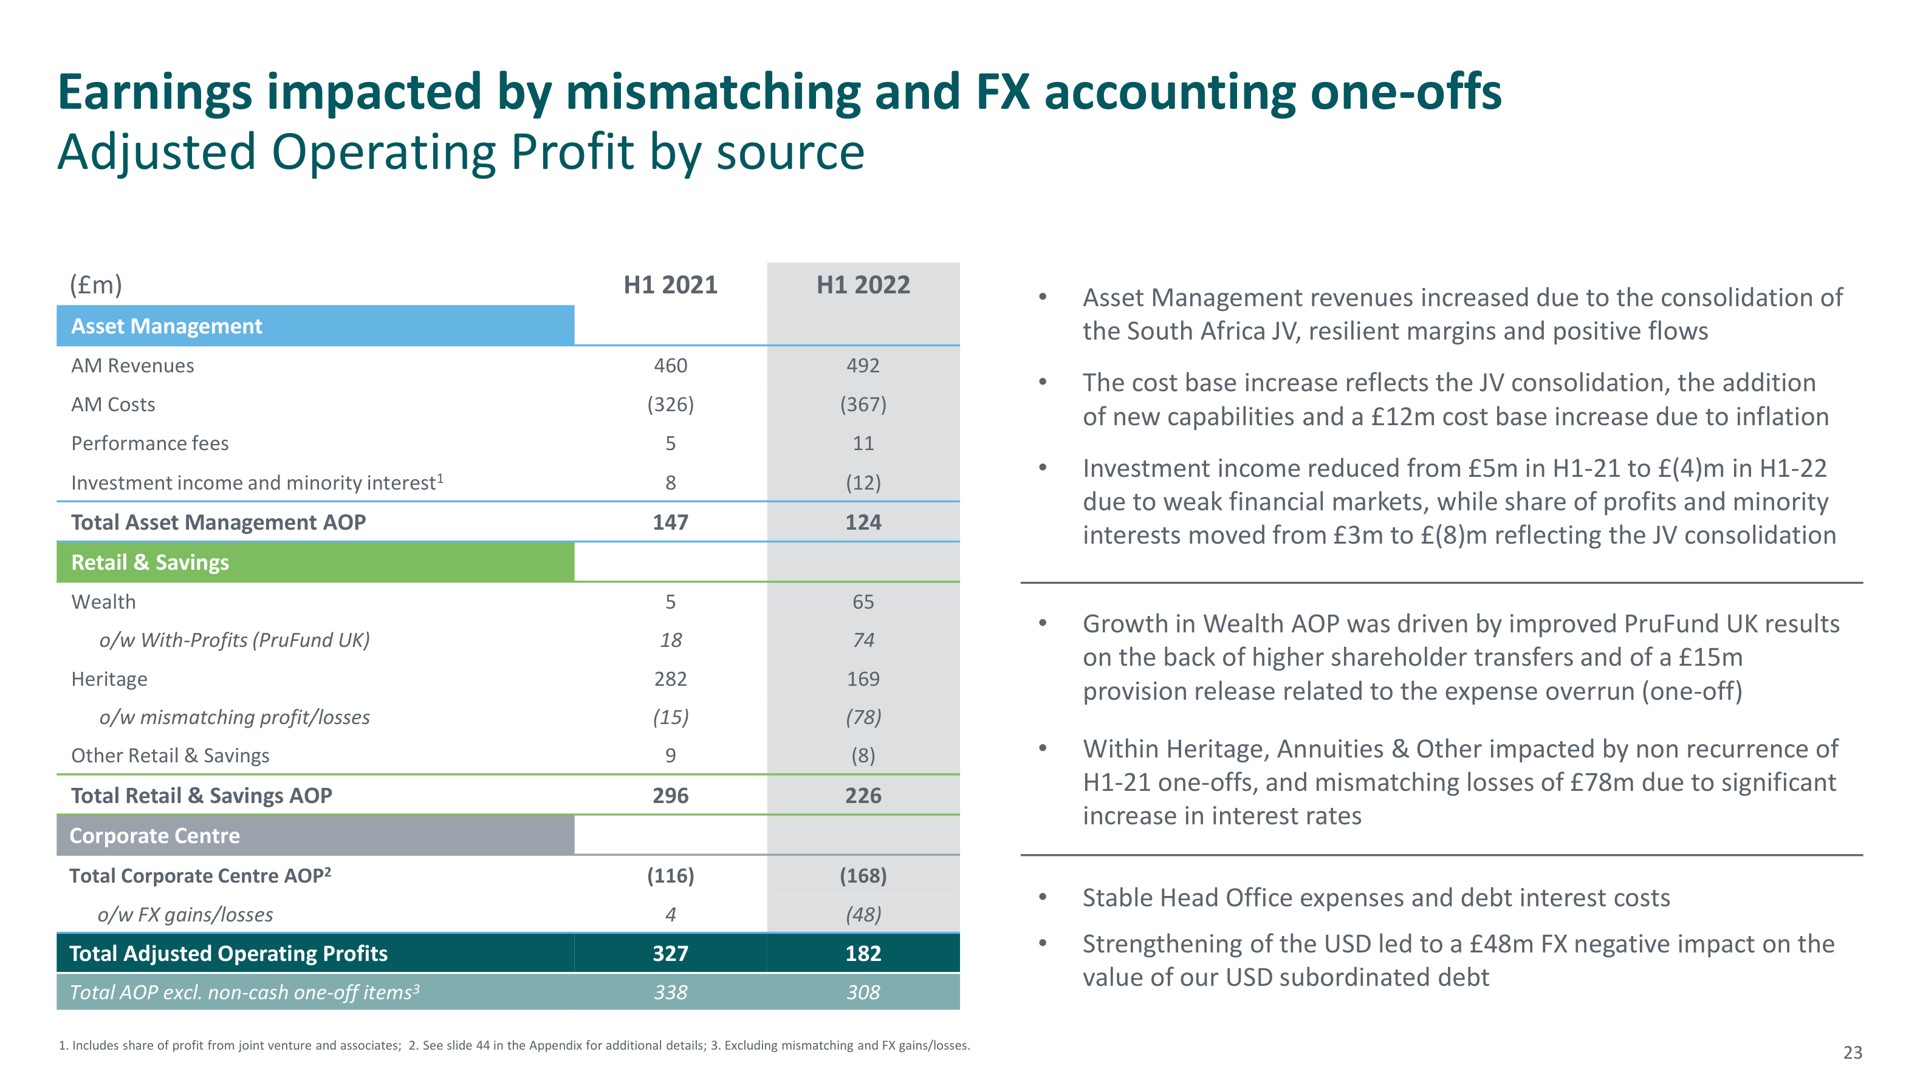 earnings impacted by mismatching and accounting one offs adjusted operating profit by source | M&G